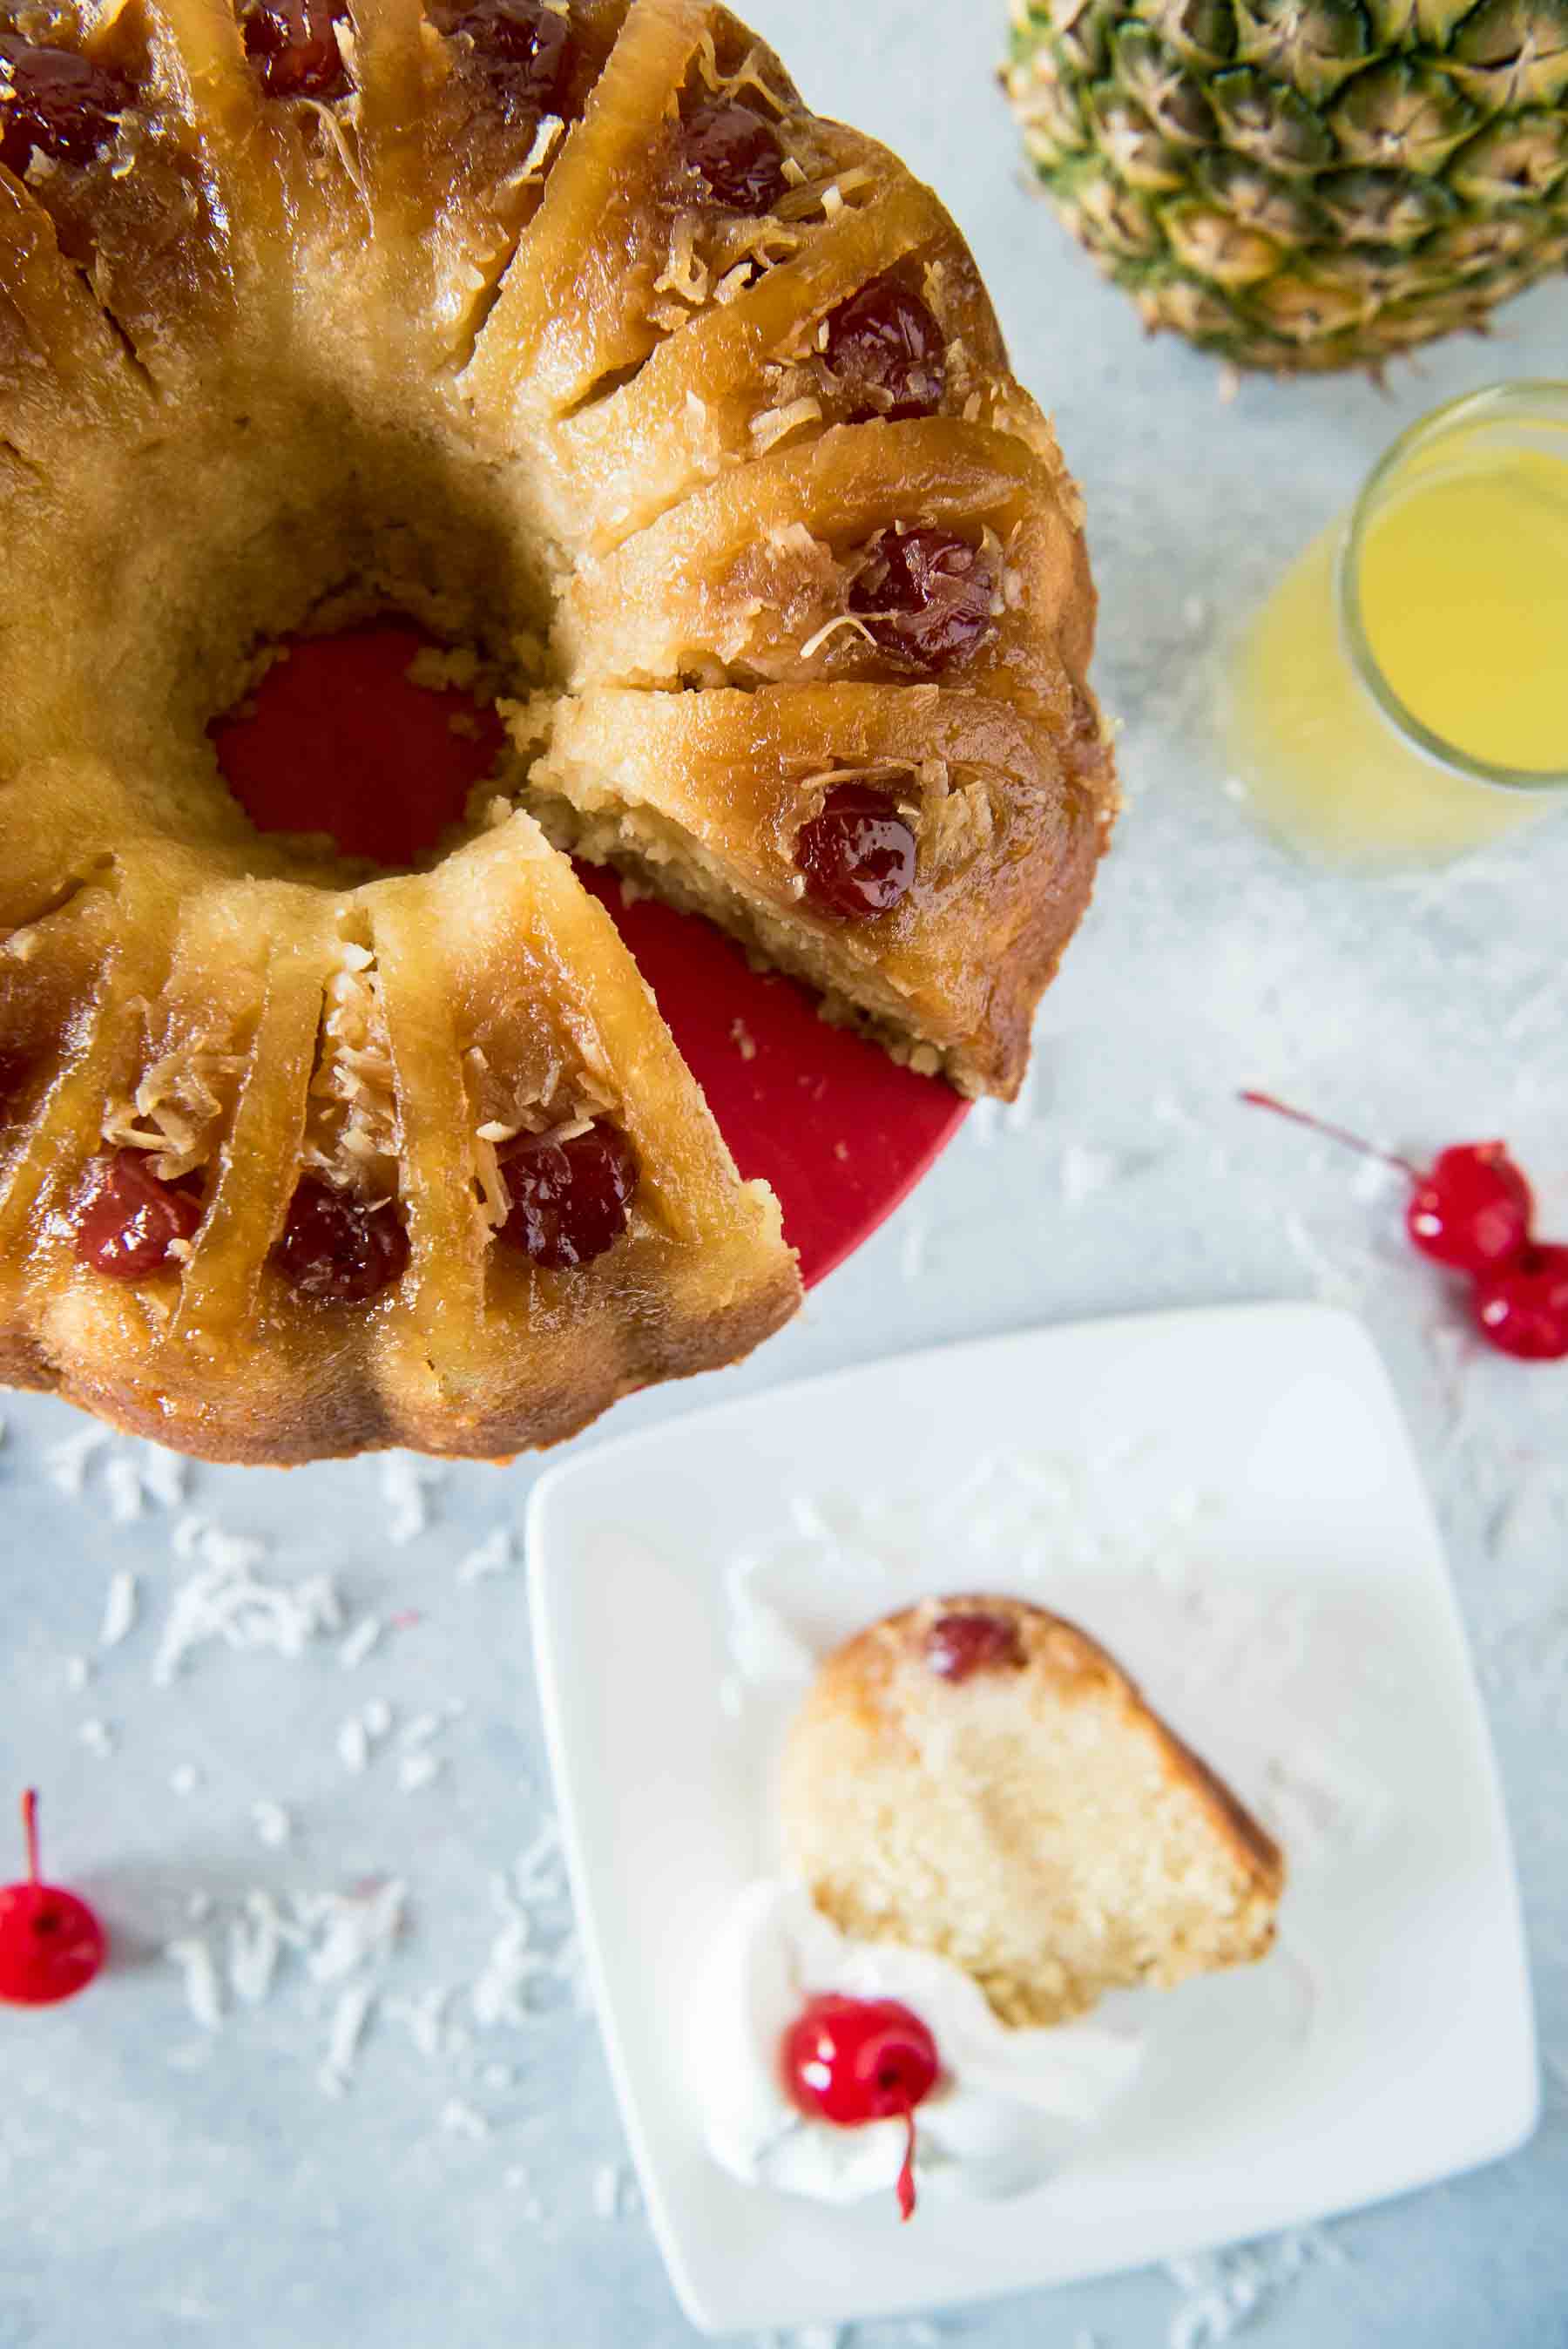 This Pina Colada Bundt Cake is unlike any you've had before! It takes the base of an old-fashioned soda-based cake and flips it on its head, turning it into a moist, tropical cocktail-flavored confection! 